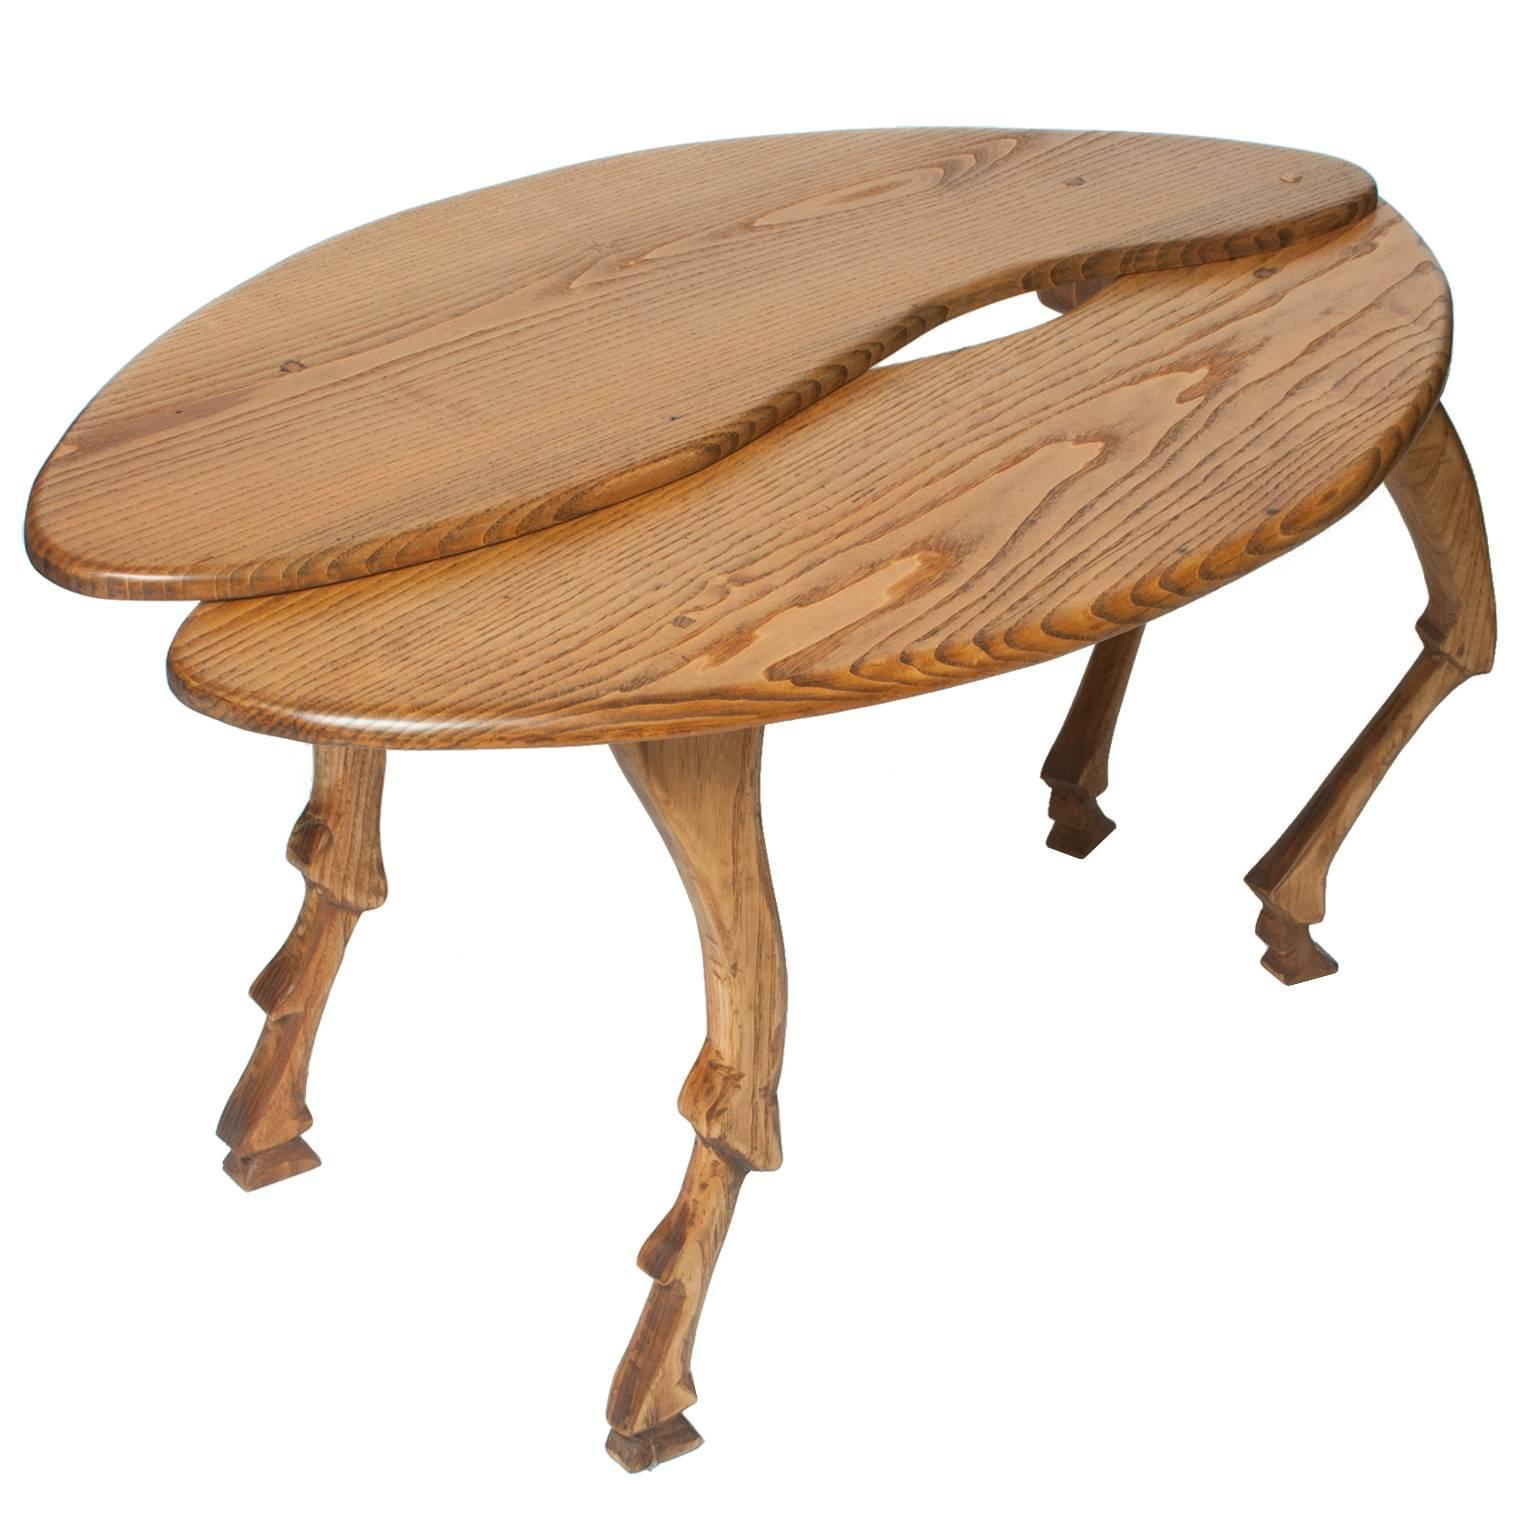 Scandinavian Modern Hand-Carved Surrealist Adjustable Insect Table